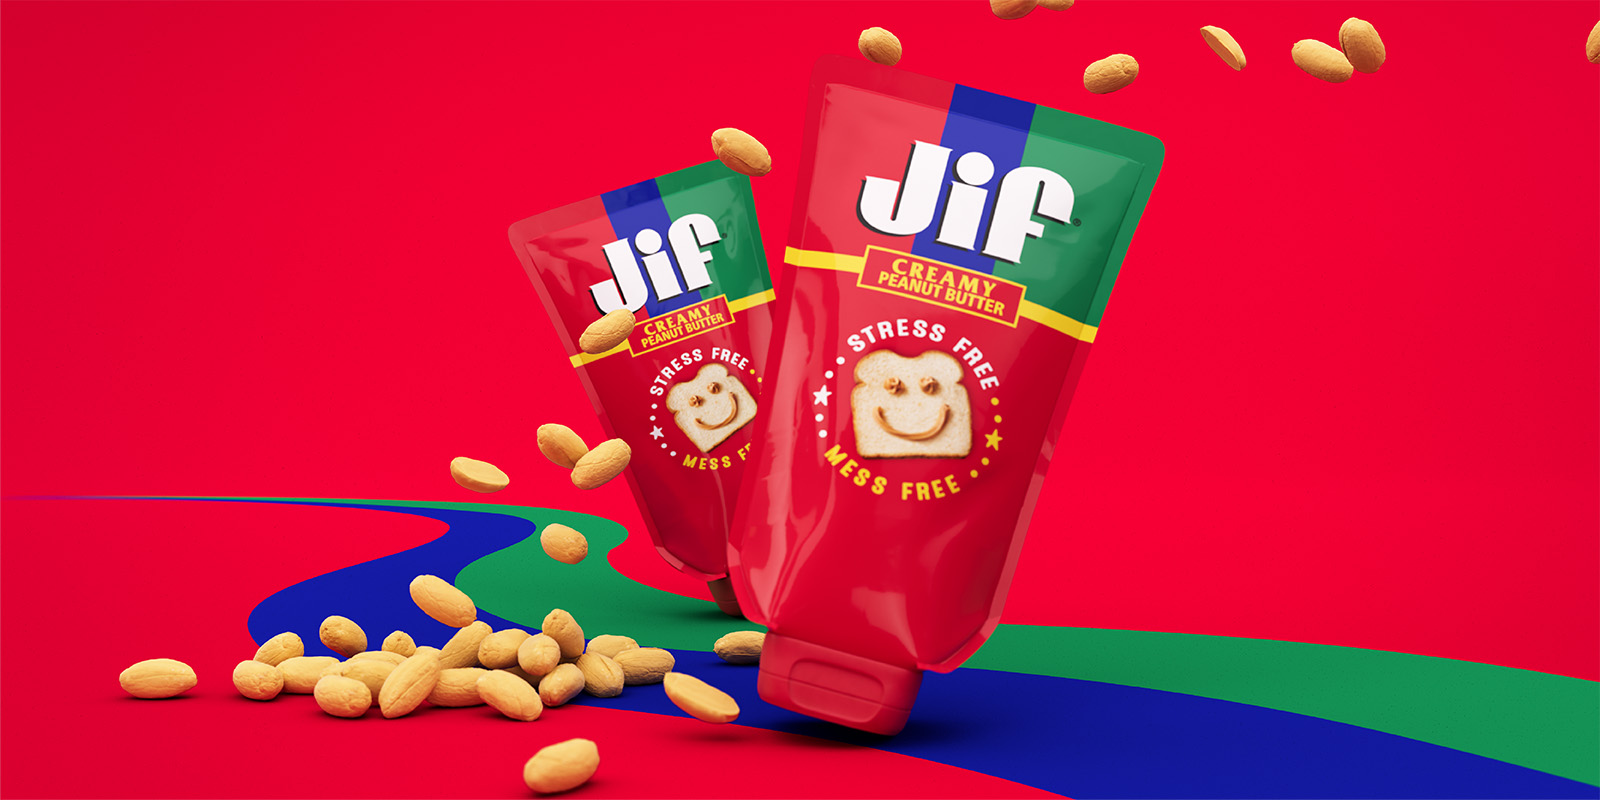 Squeezier & Easier: LPK’s New Design Is That Jif’ing Good